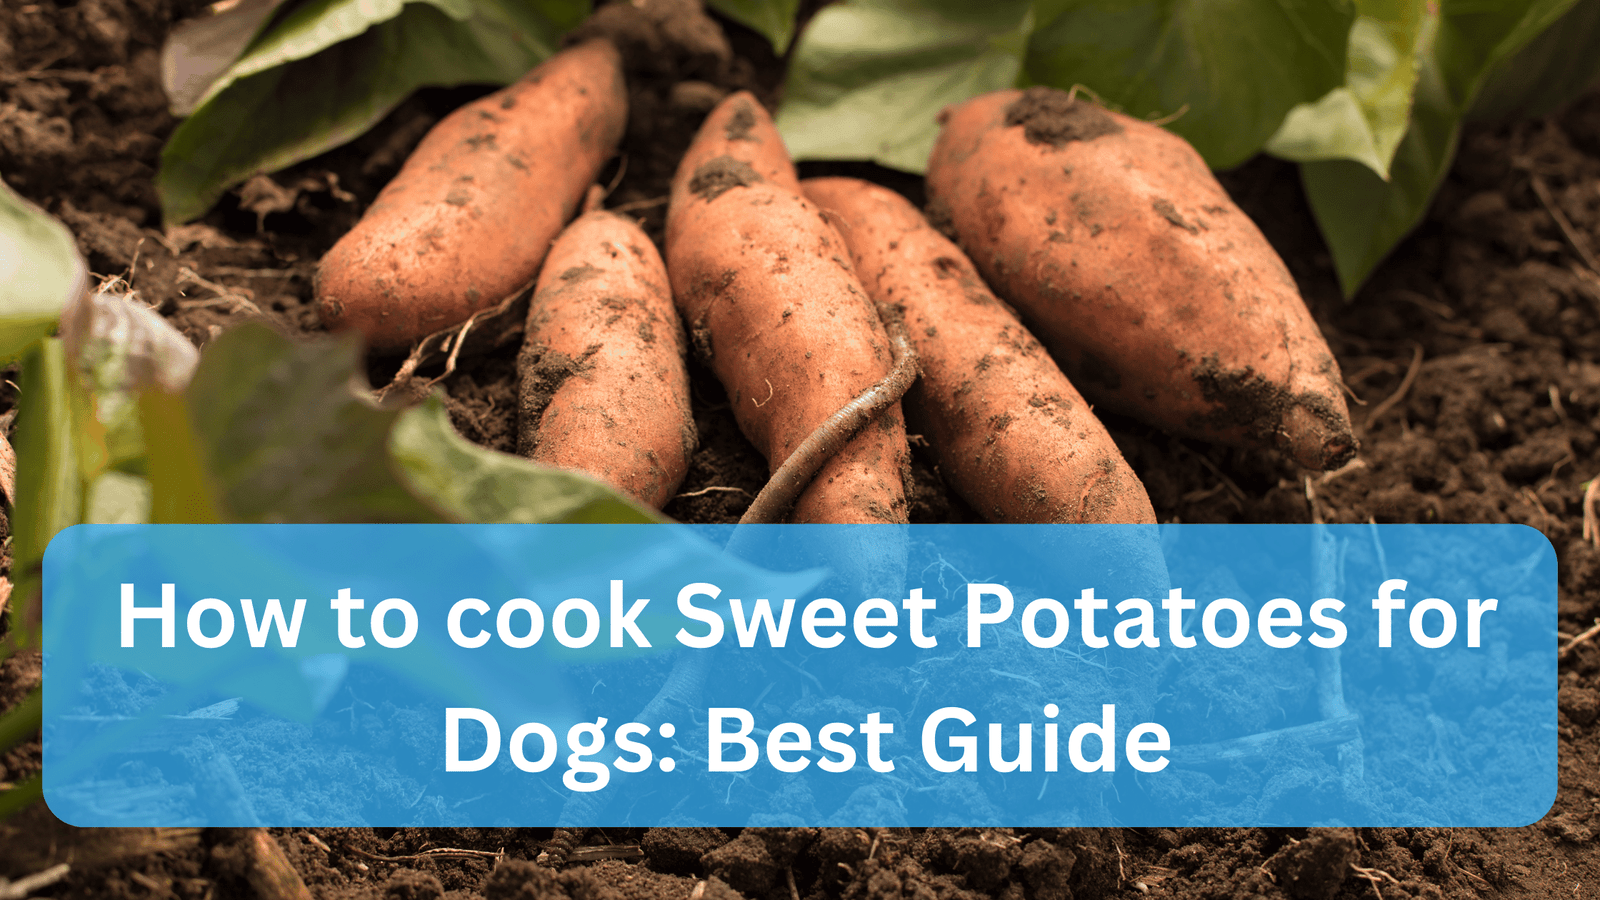 How to cook Sweet Potatoes for Dogs